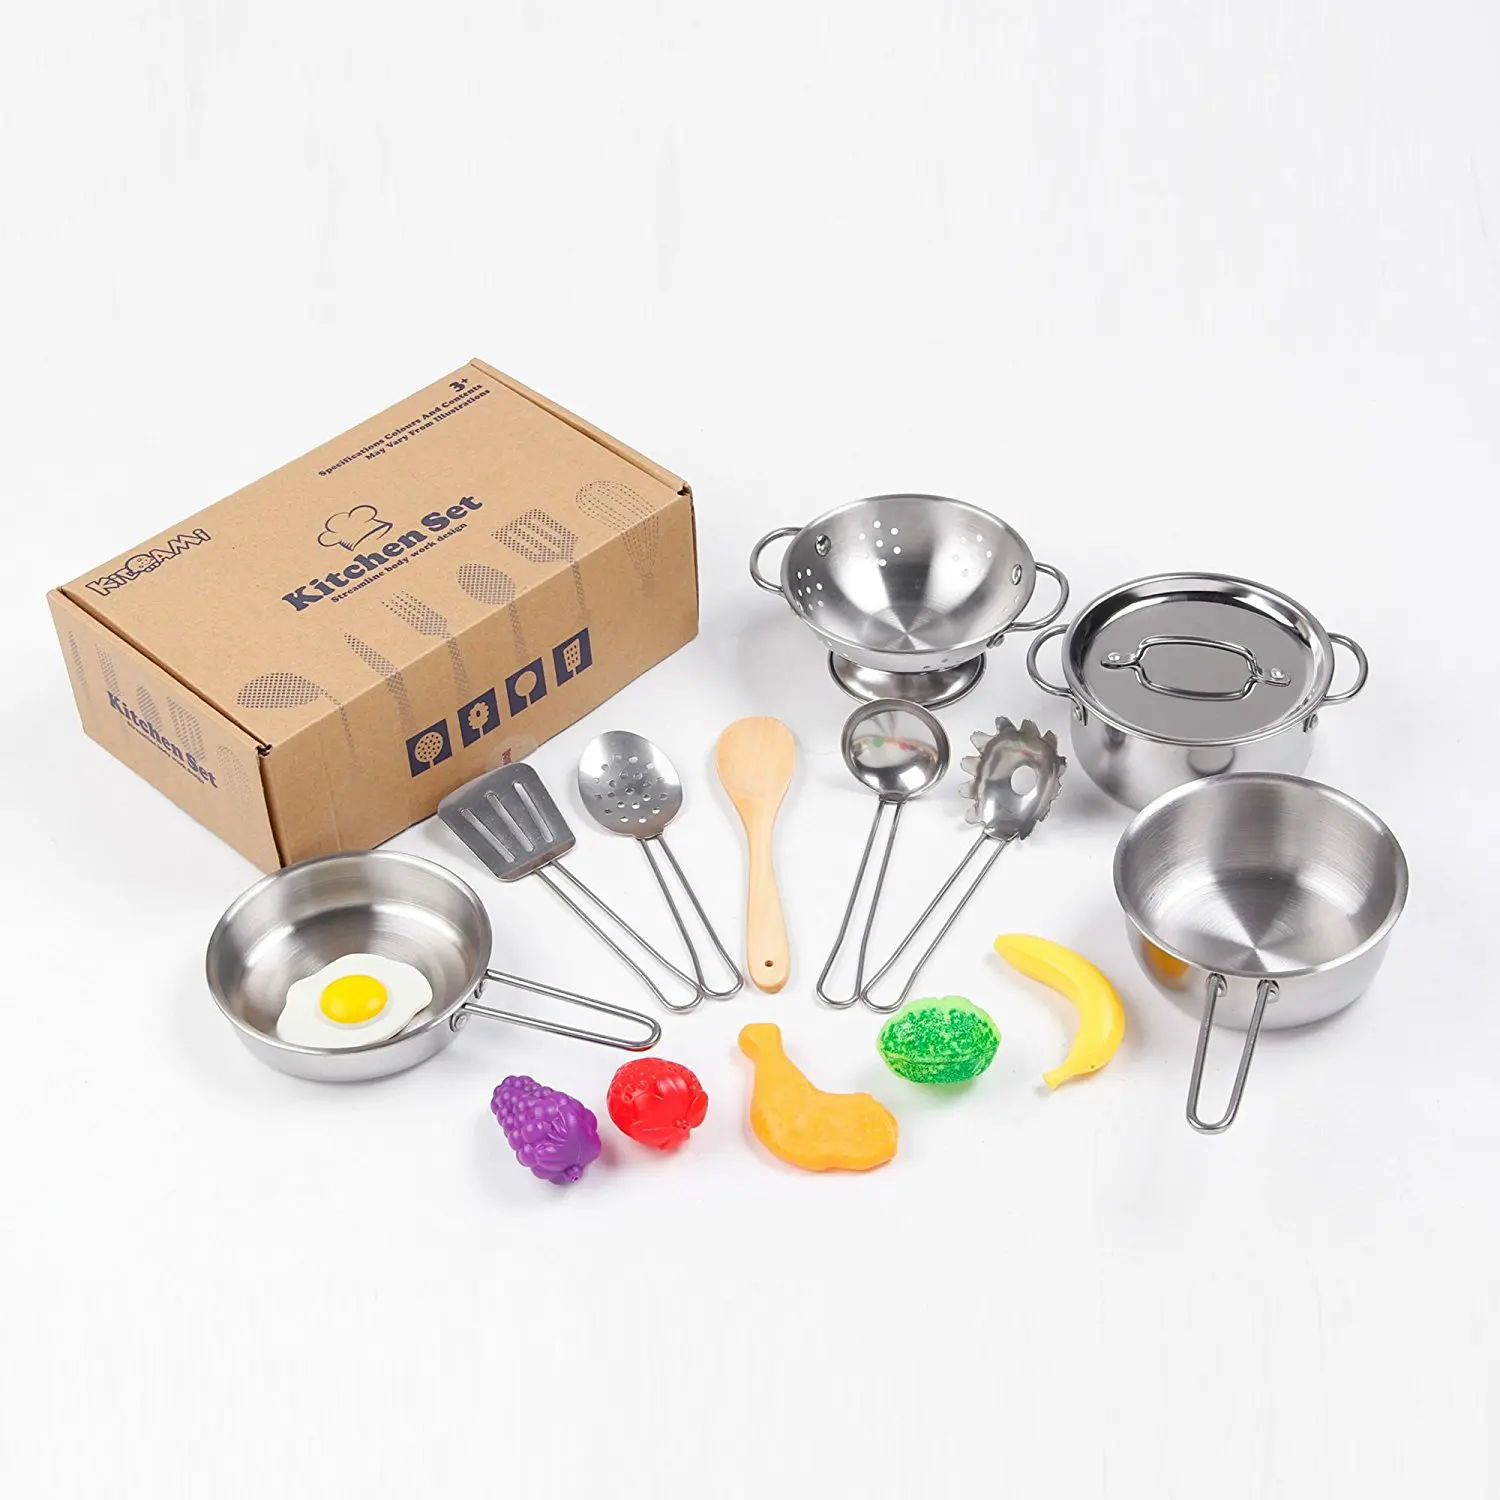 KIDAMI Large Size Kitchen Pretend Toys Stainless Steel Cookware Playset with 16 Pieces of Pots and Pans and Cooking Utensils for Kids Upgrade